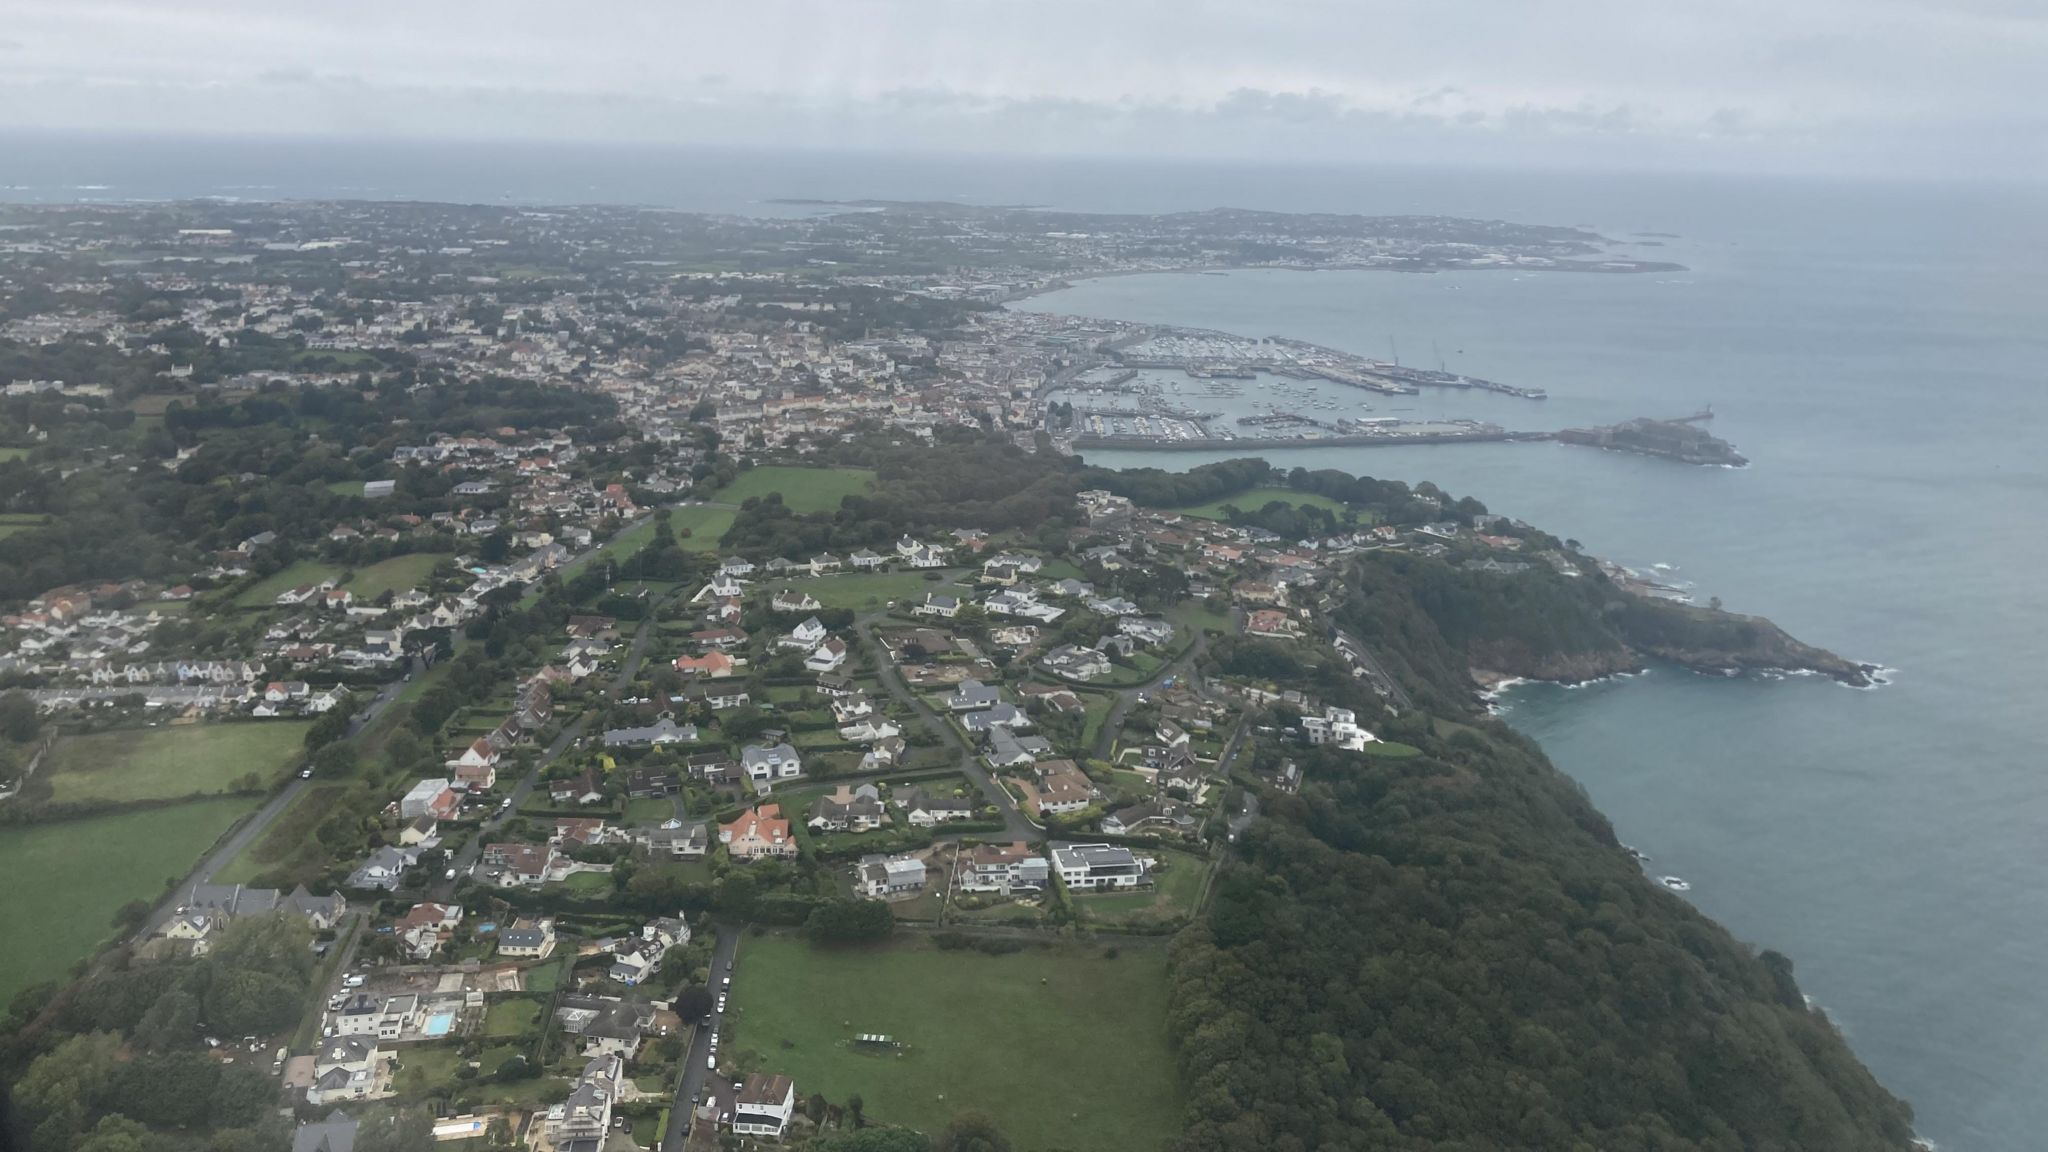 Aerial of Guernsey